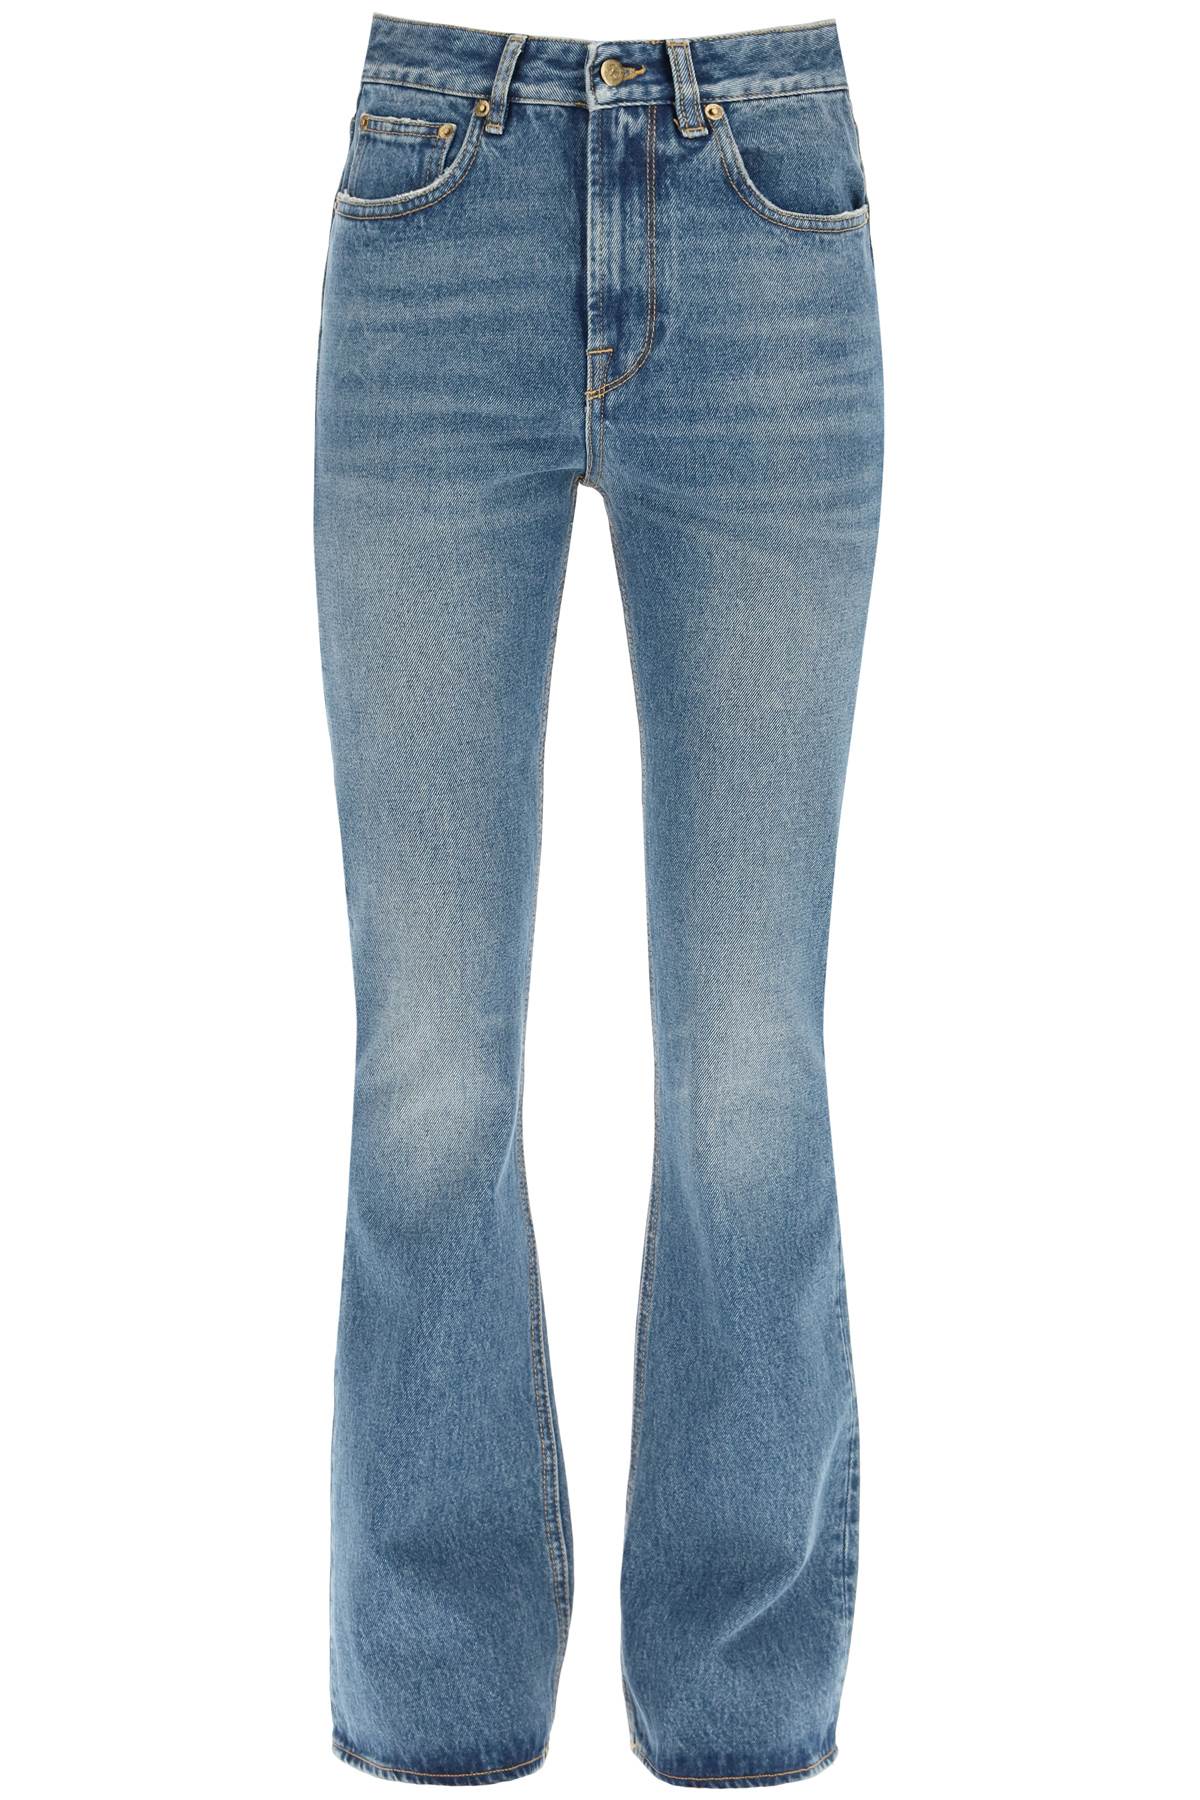 Golden Goose Bootcut Jeans Journey Collection